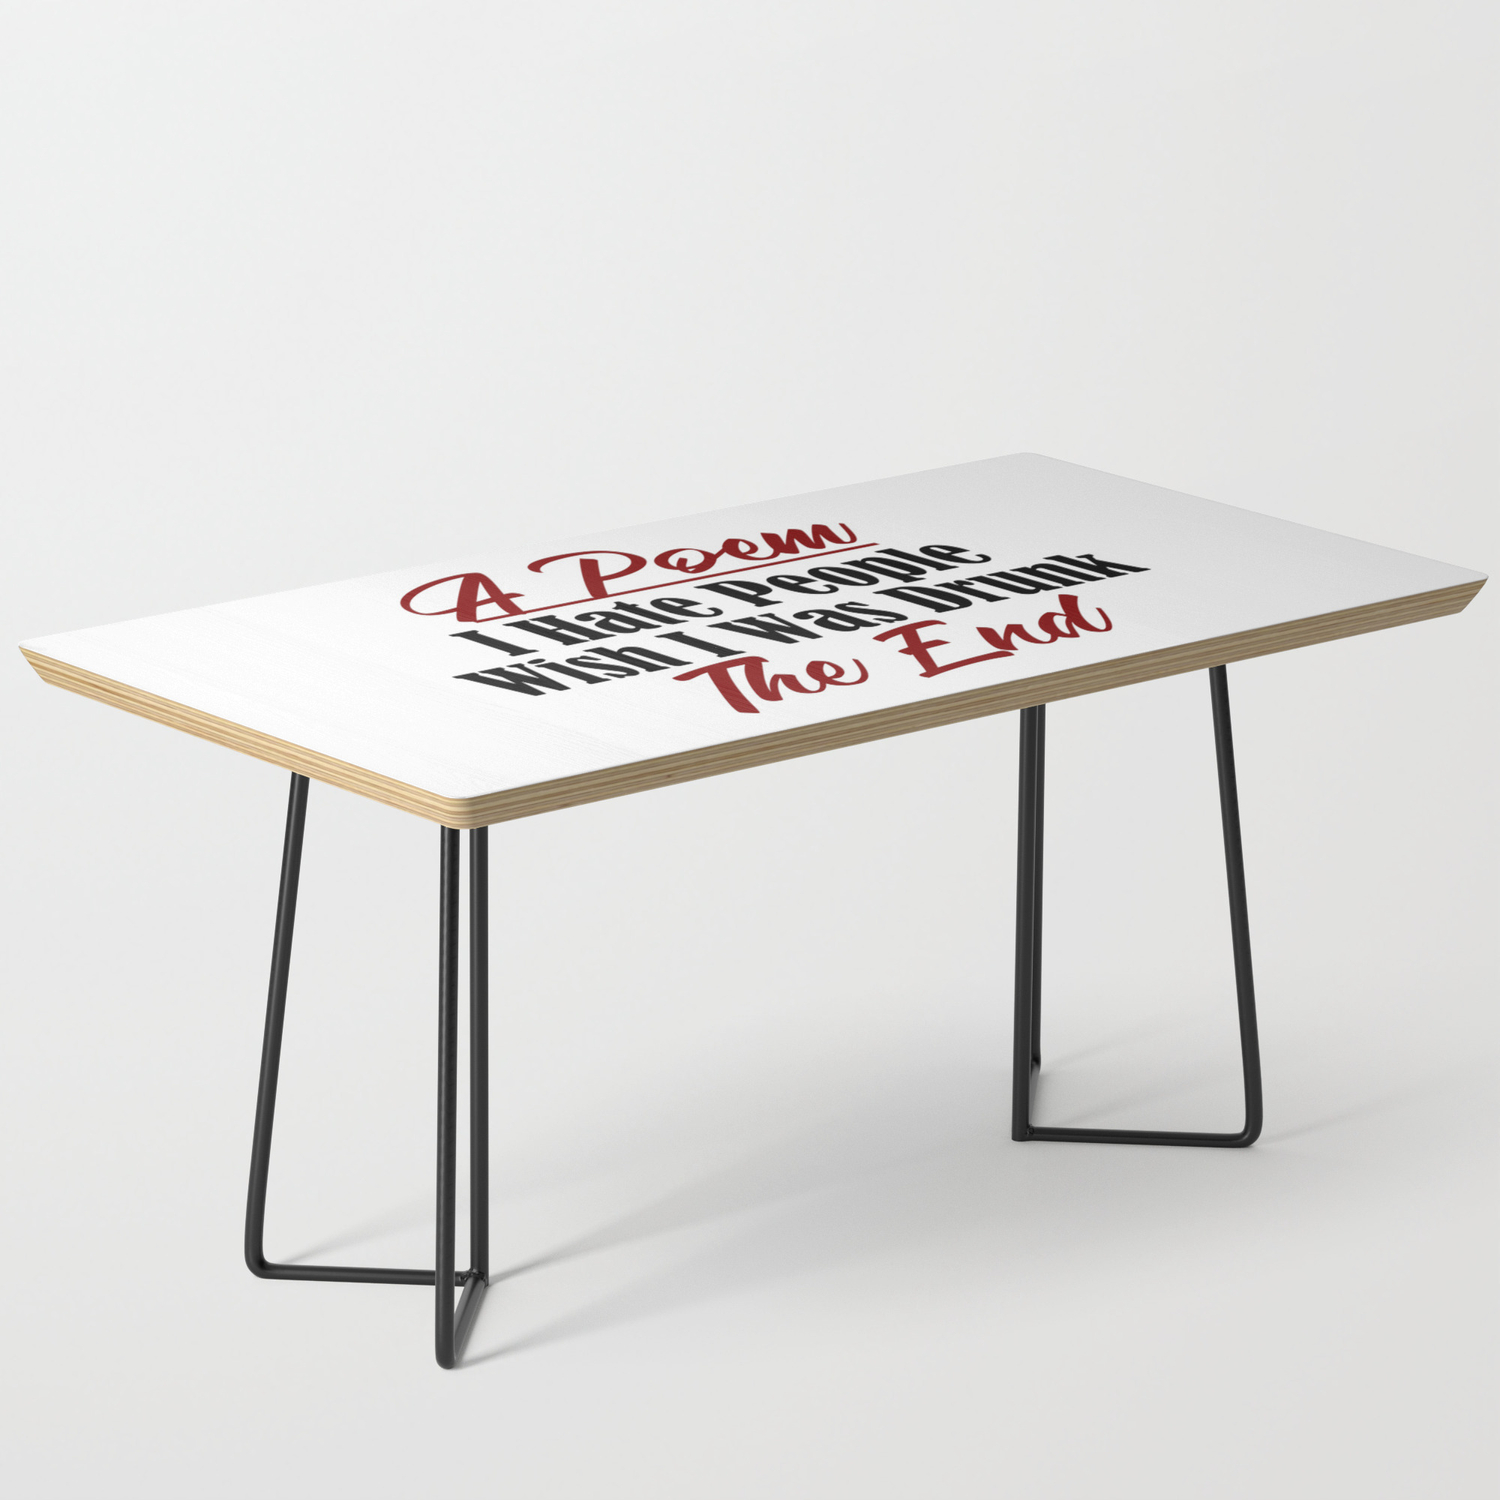 siren itself Ready Funny Poem Design Hate People Stay Drunk Stupidity Real Meme Coffee Table  by Art-iculate | Society6